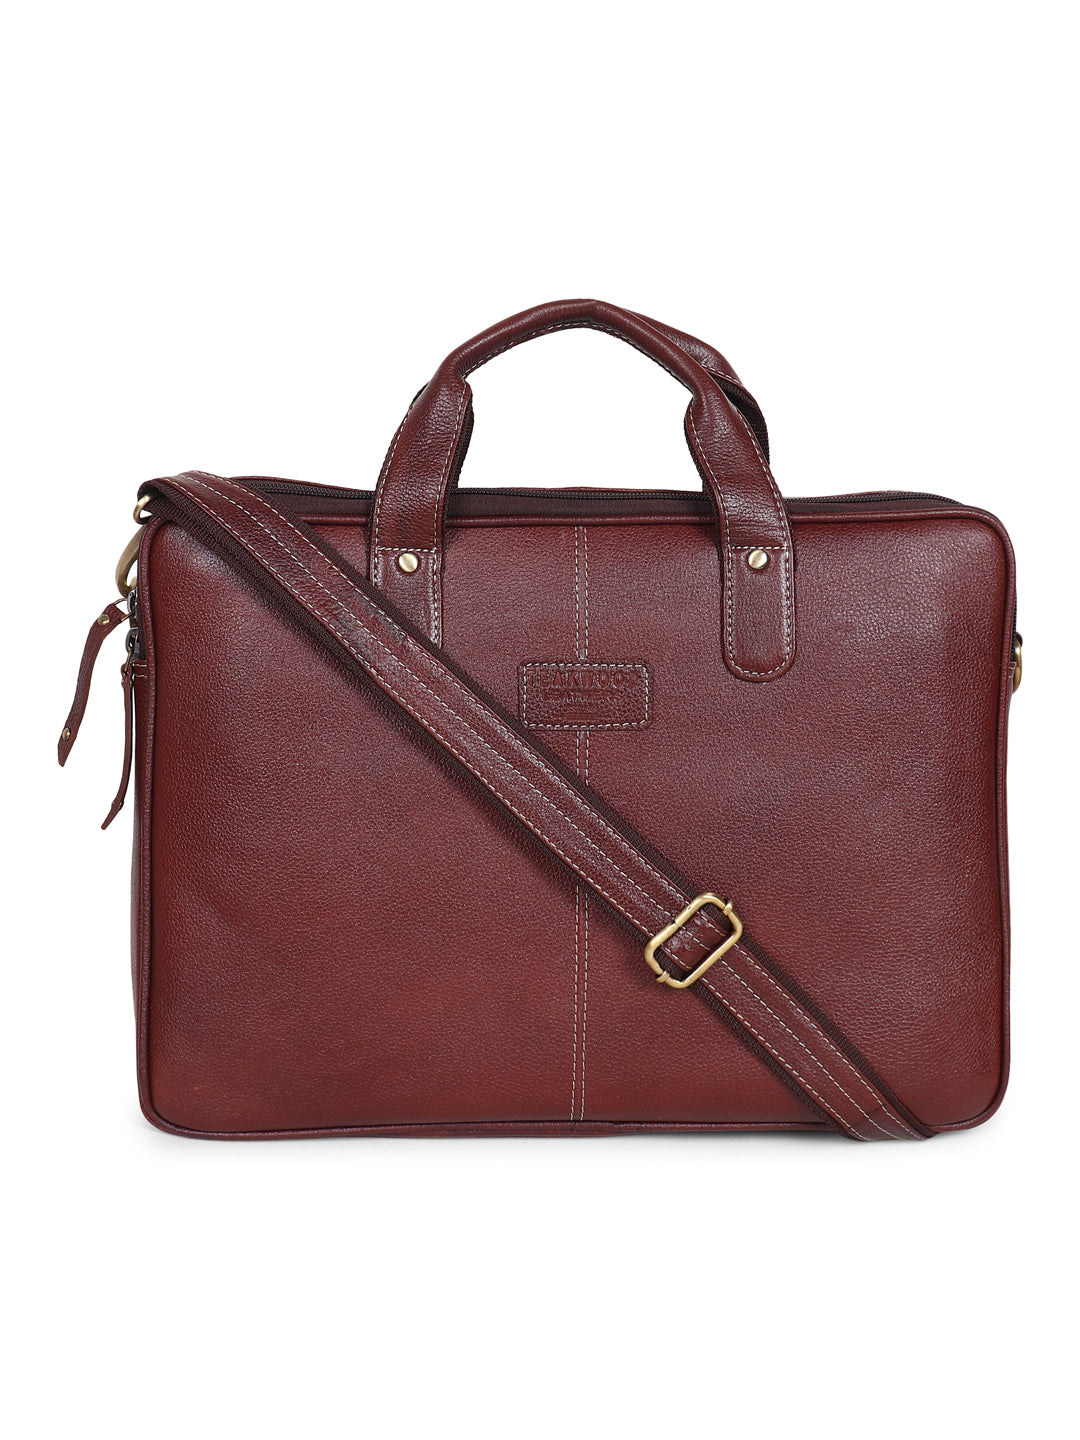 ITALY-Men's handmade genuine leather handbag with metal zip closure and  shoulder strap | Venice Leather